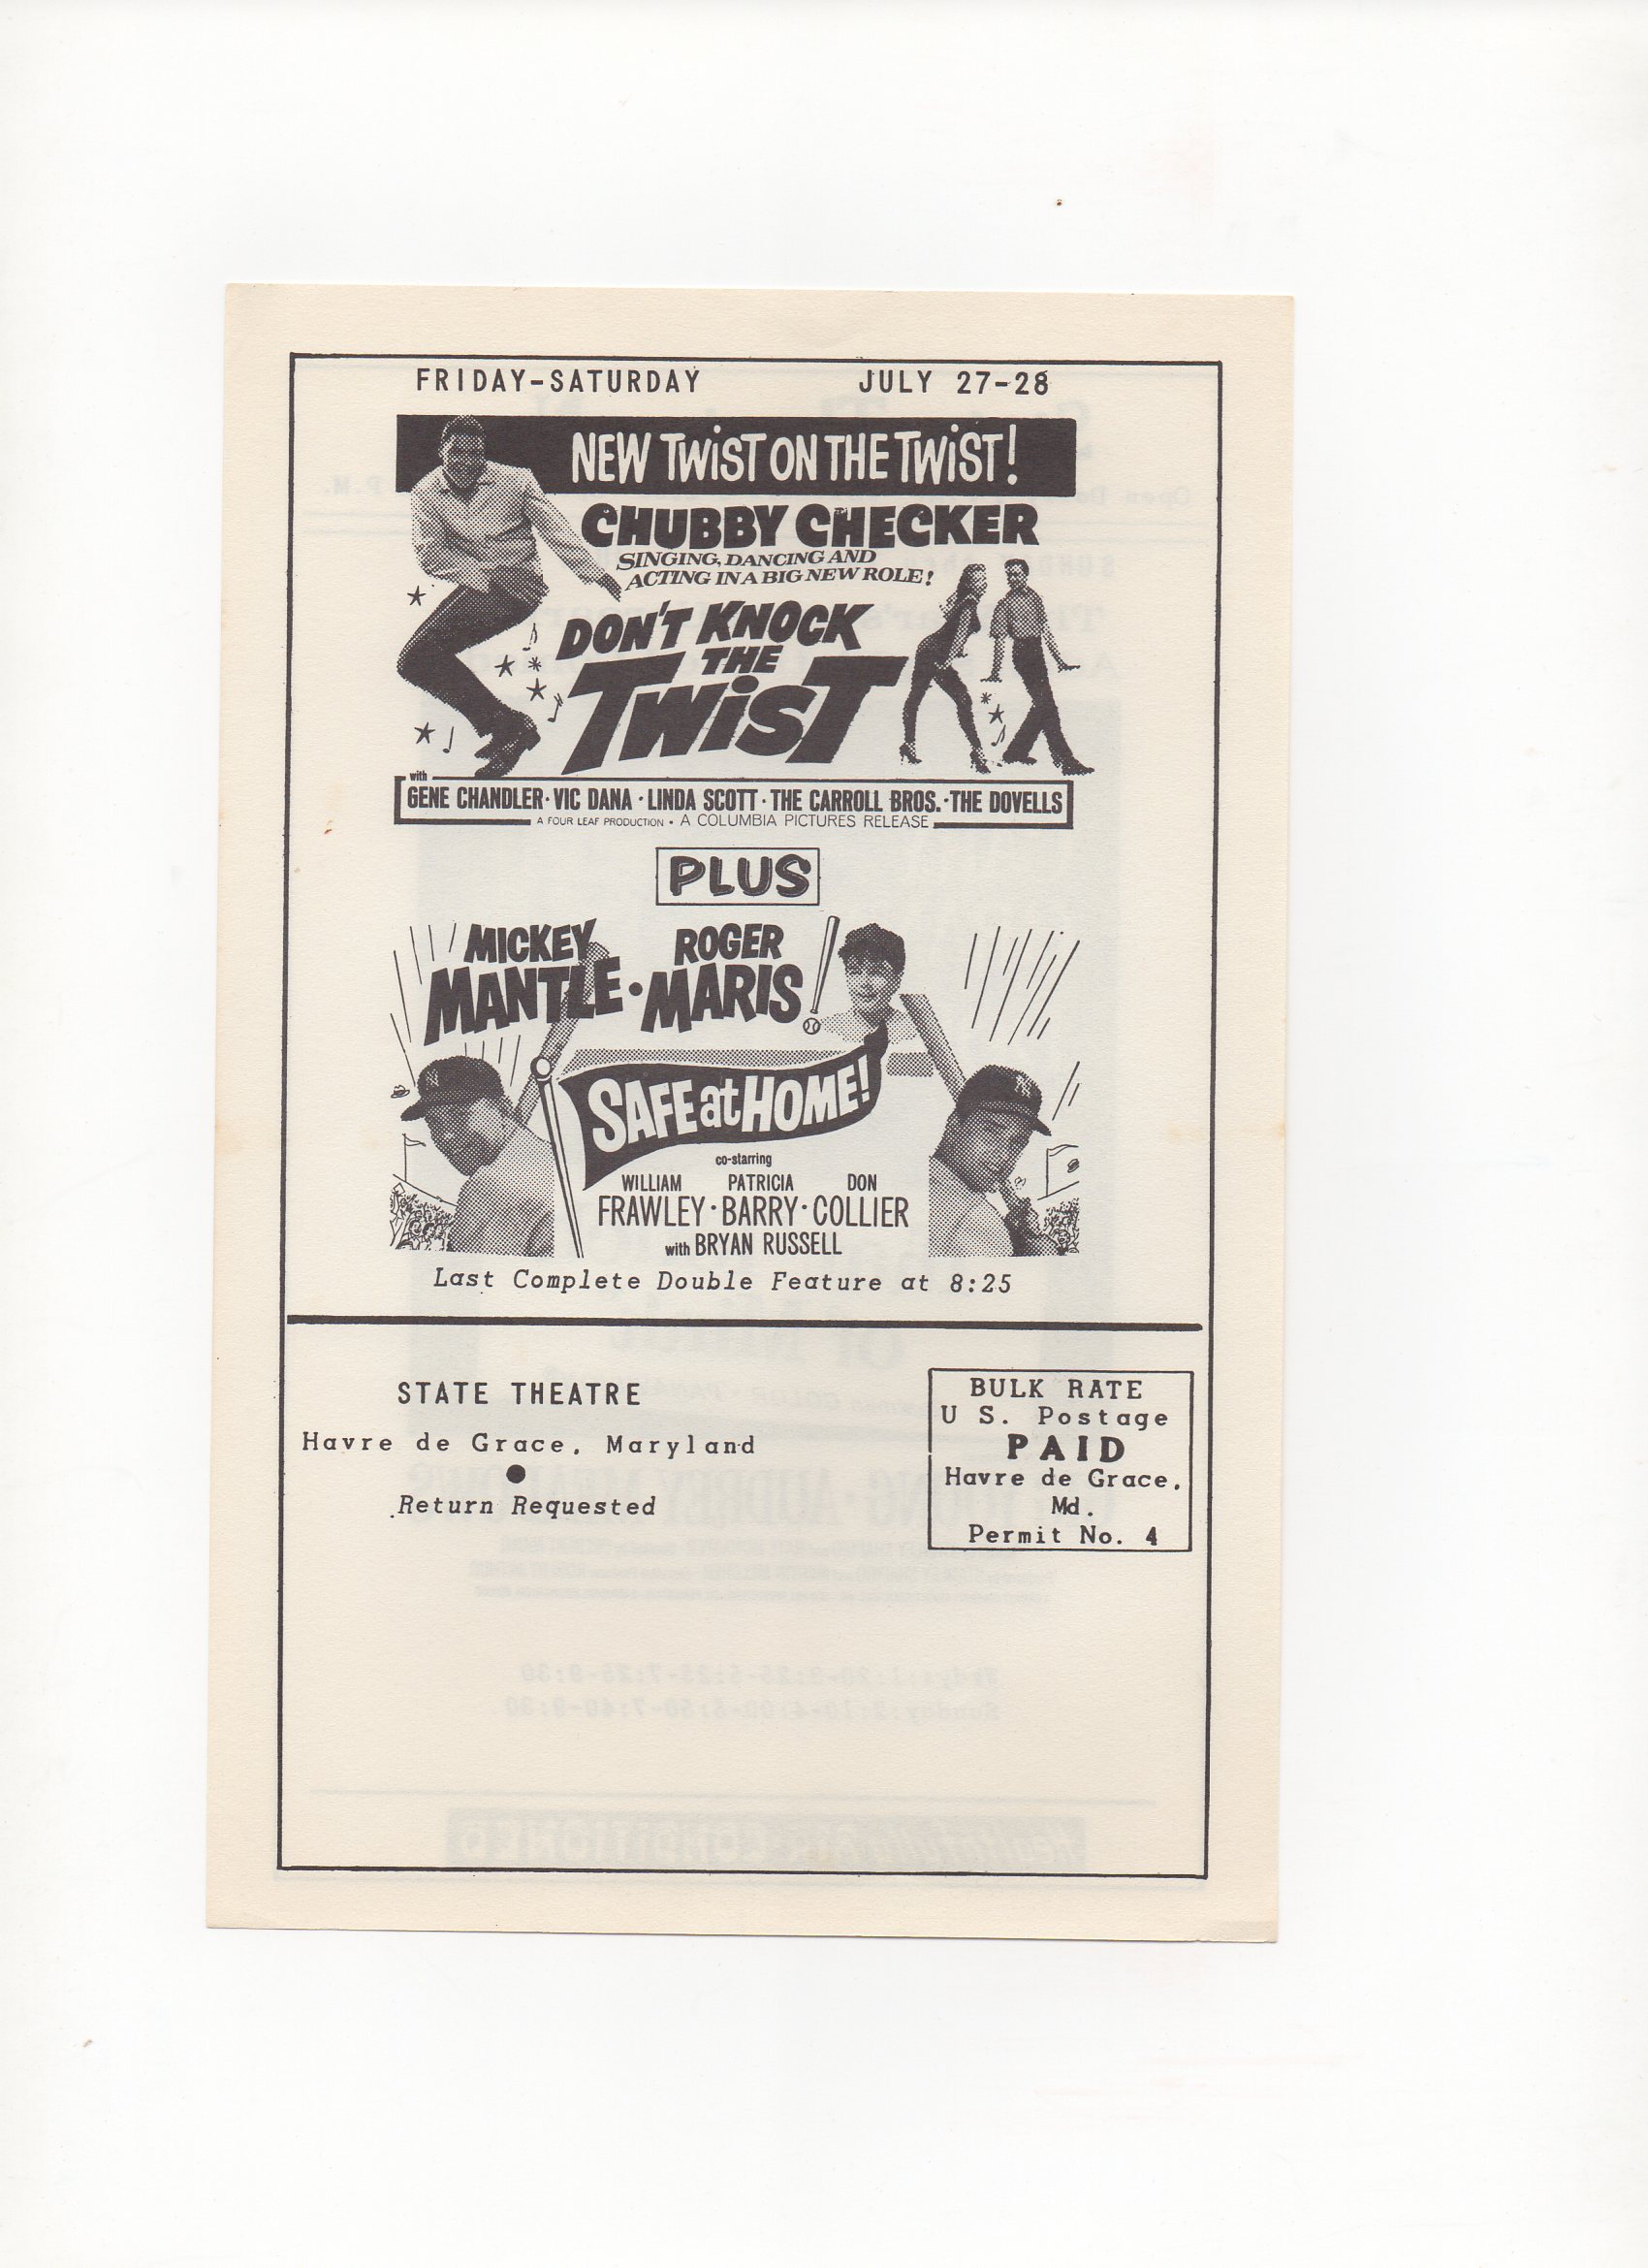 1962 state theatre, havre de grace, maryland, small mailer